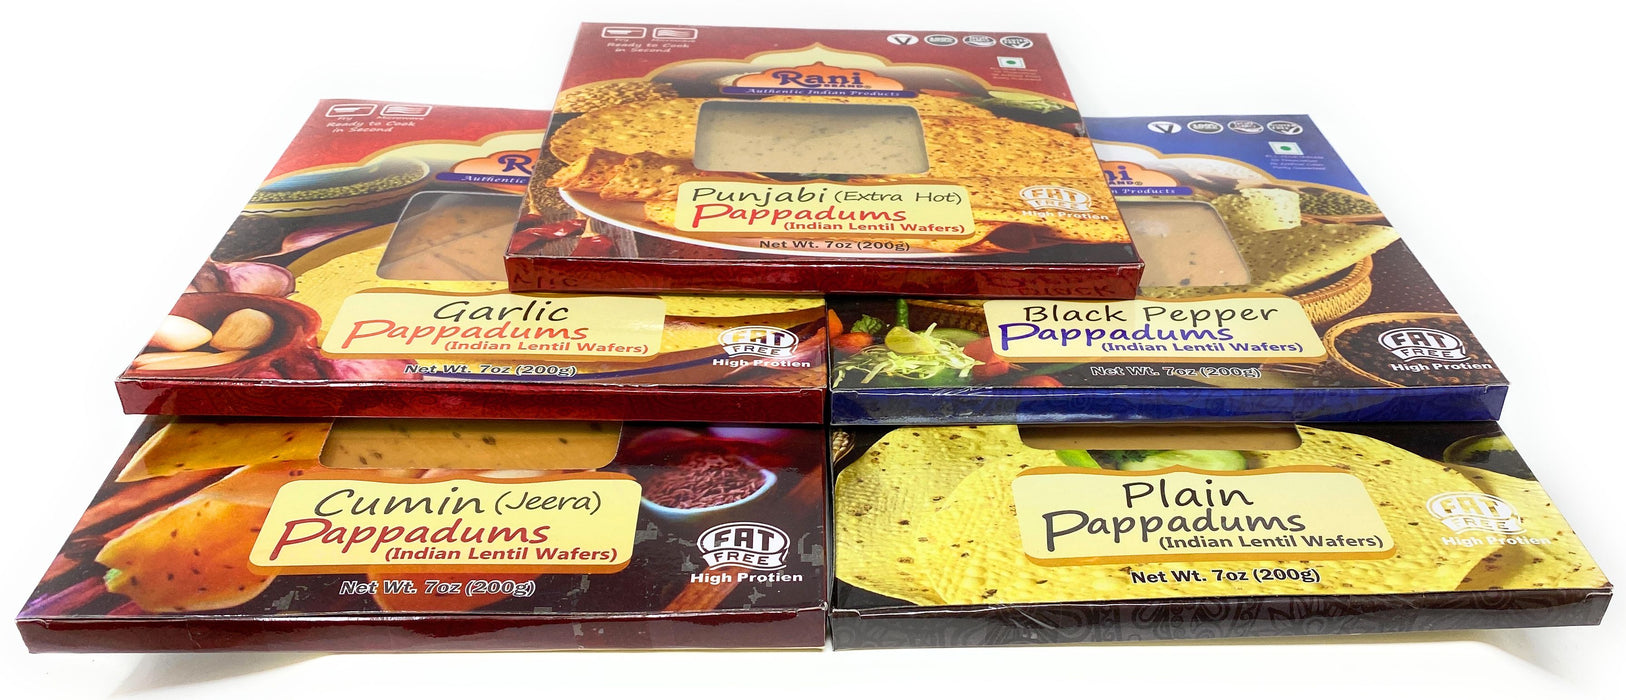 Rani Pappad (Lentil Wafer) 5-Variety Pack (Plain, Garlic, Cumin, Ex Hot, Black Pepper) 7ounce Approx 15pc, 7 inches  Natural, Gluten Free | NON-GMO